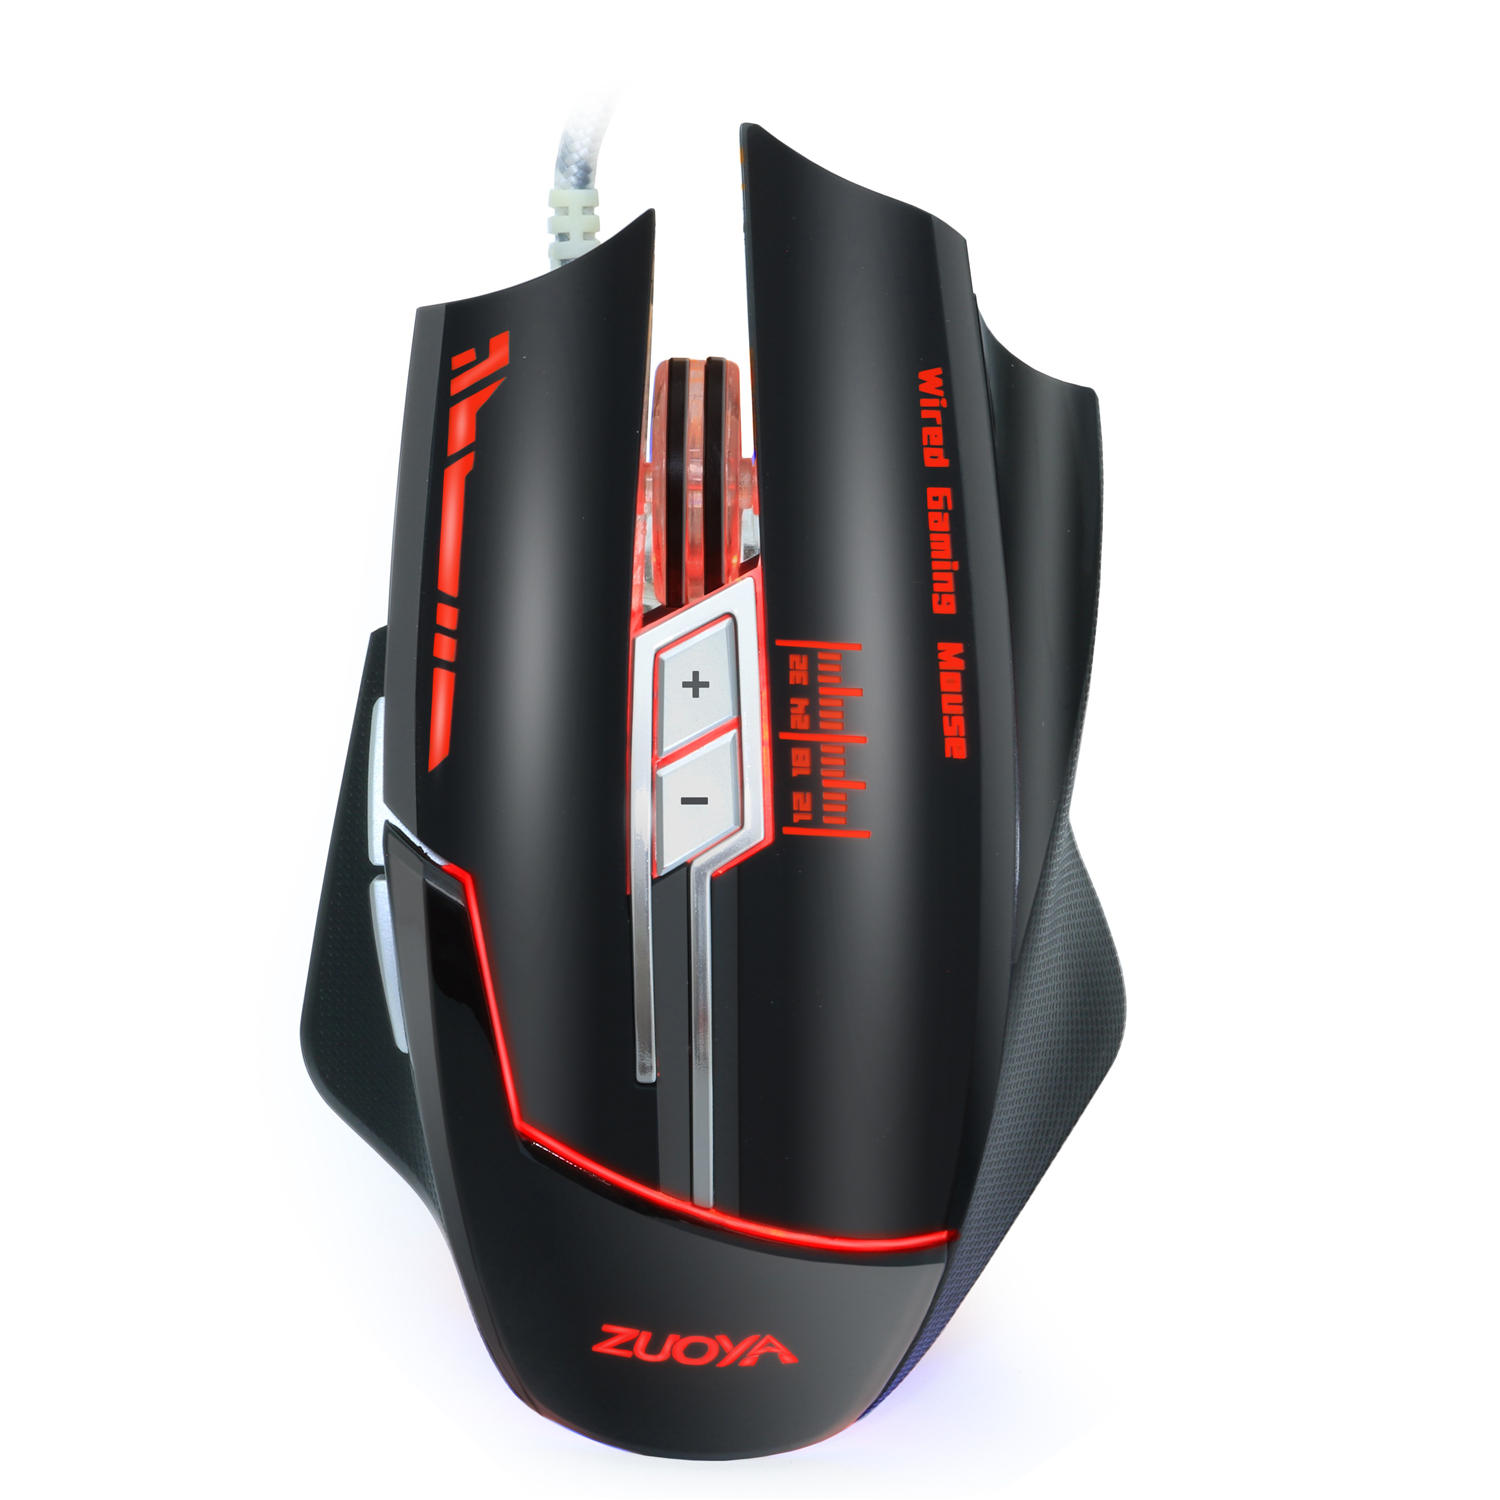 

ZUOYA MMR7 Wired Gaming Mouse USB LED Desktop Gaming Computer Optical Gamer Mice Macro Mouse For Laptop PC Computer